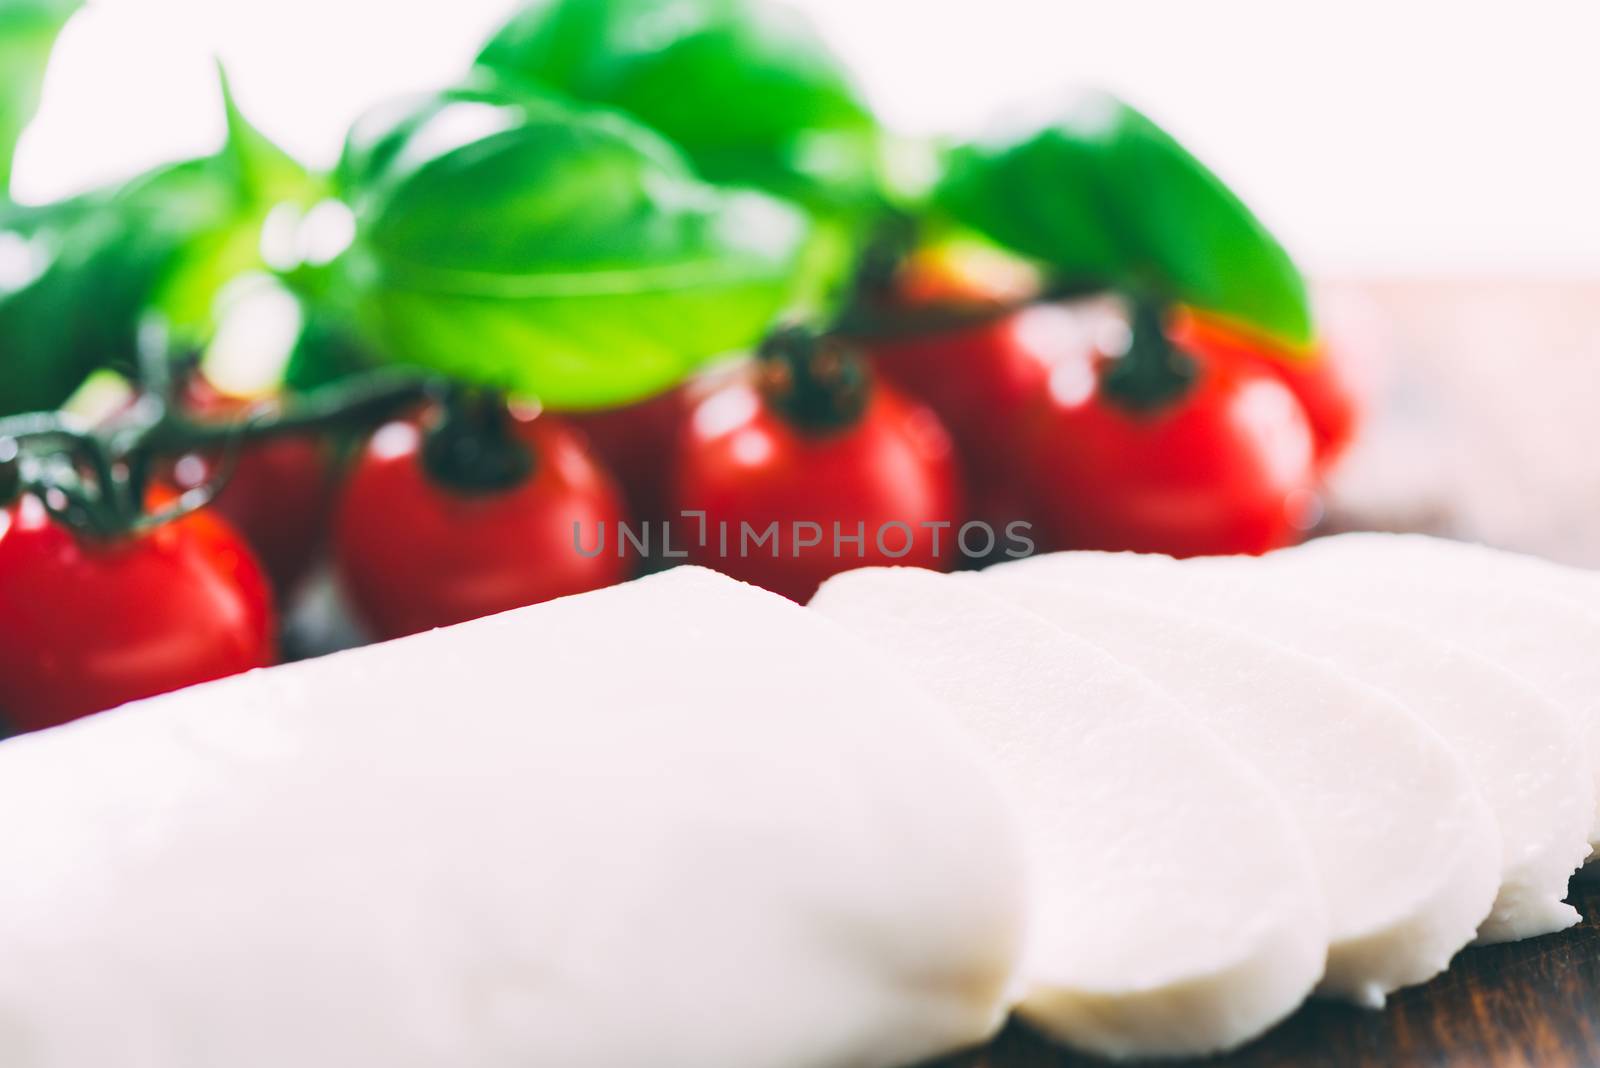 Cutted mozzarella cheese with cherry tomatoes on background